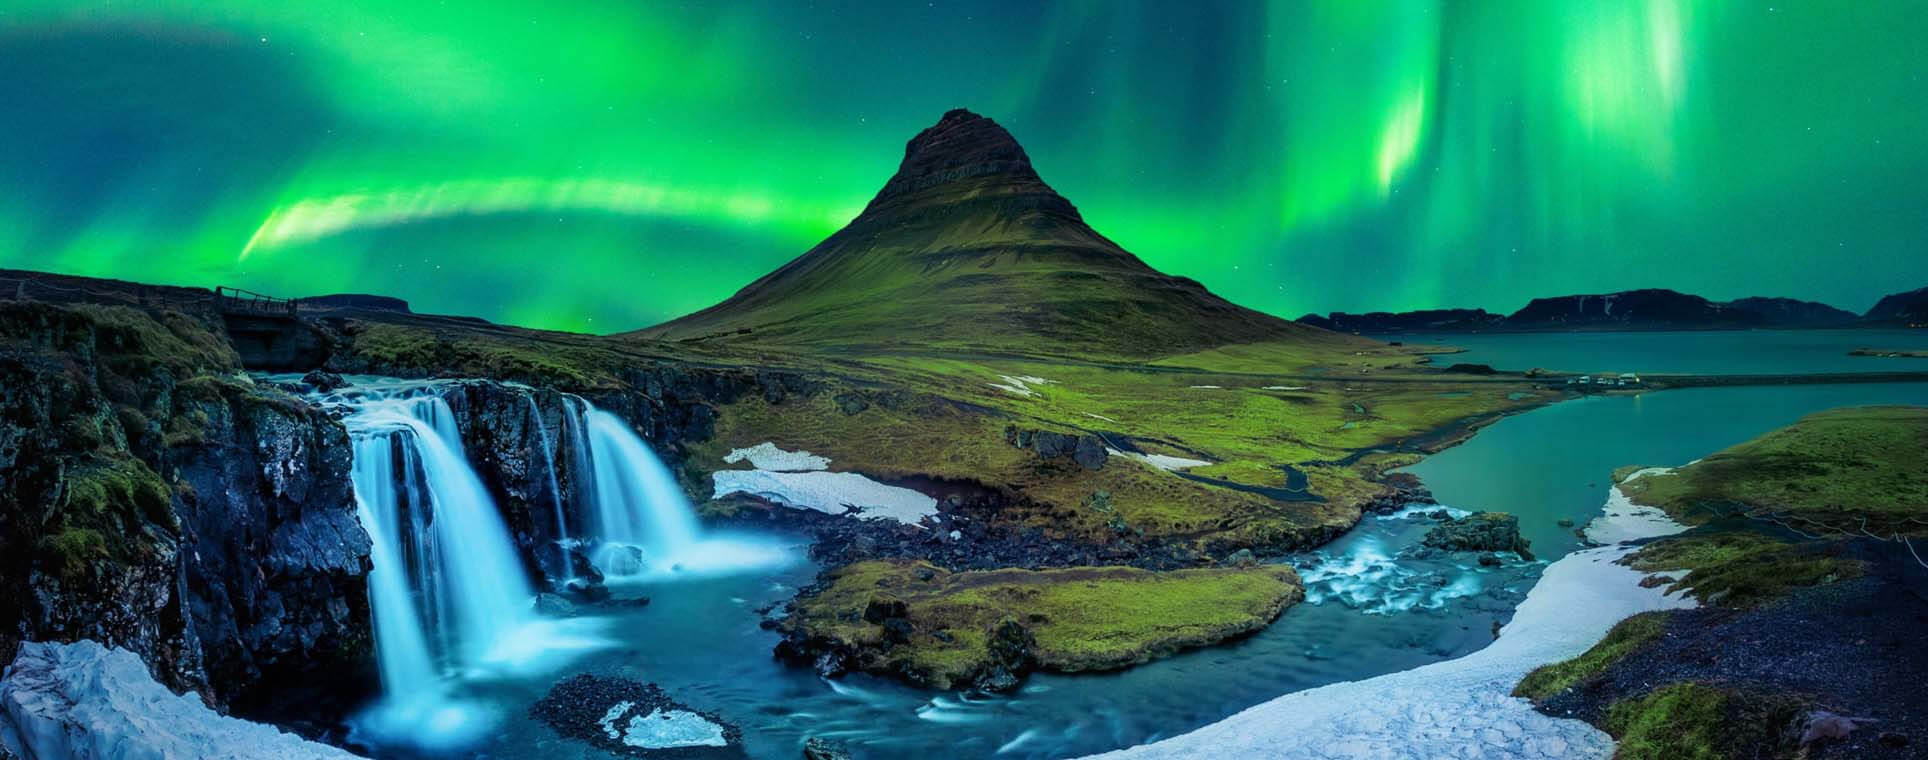 Iceland Tourist Attractions